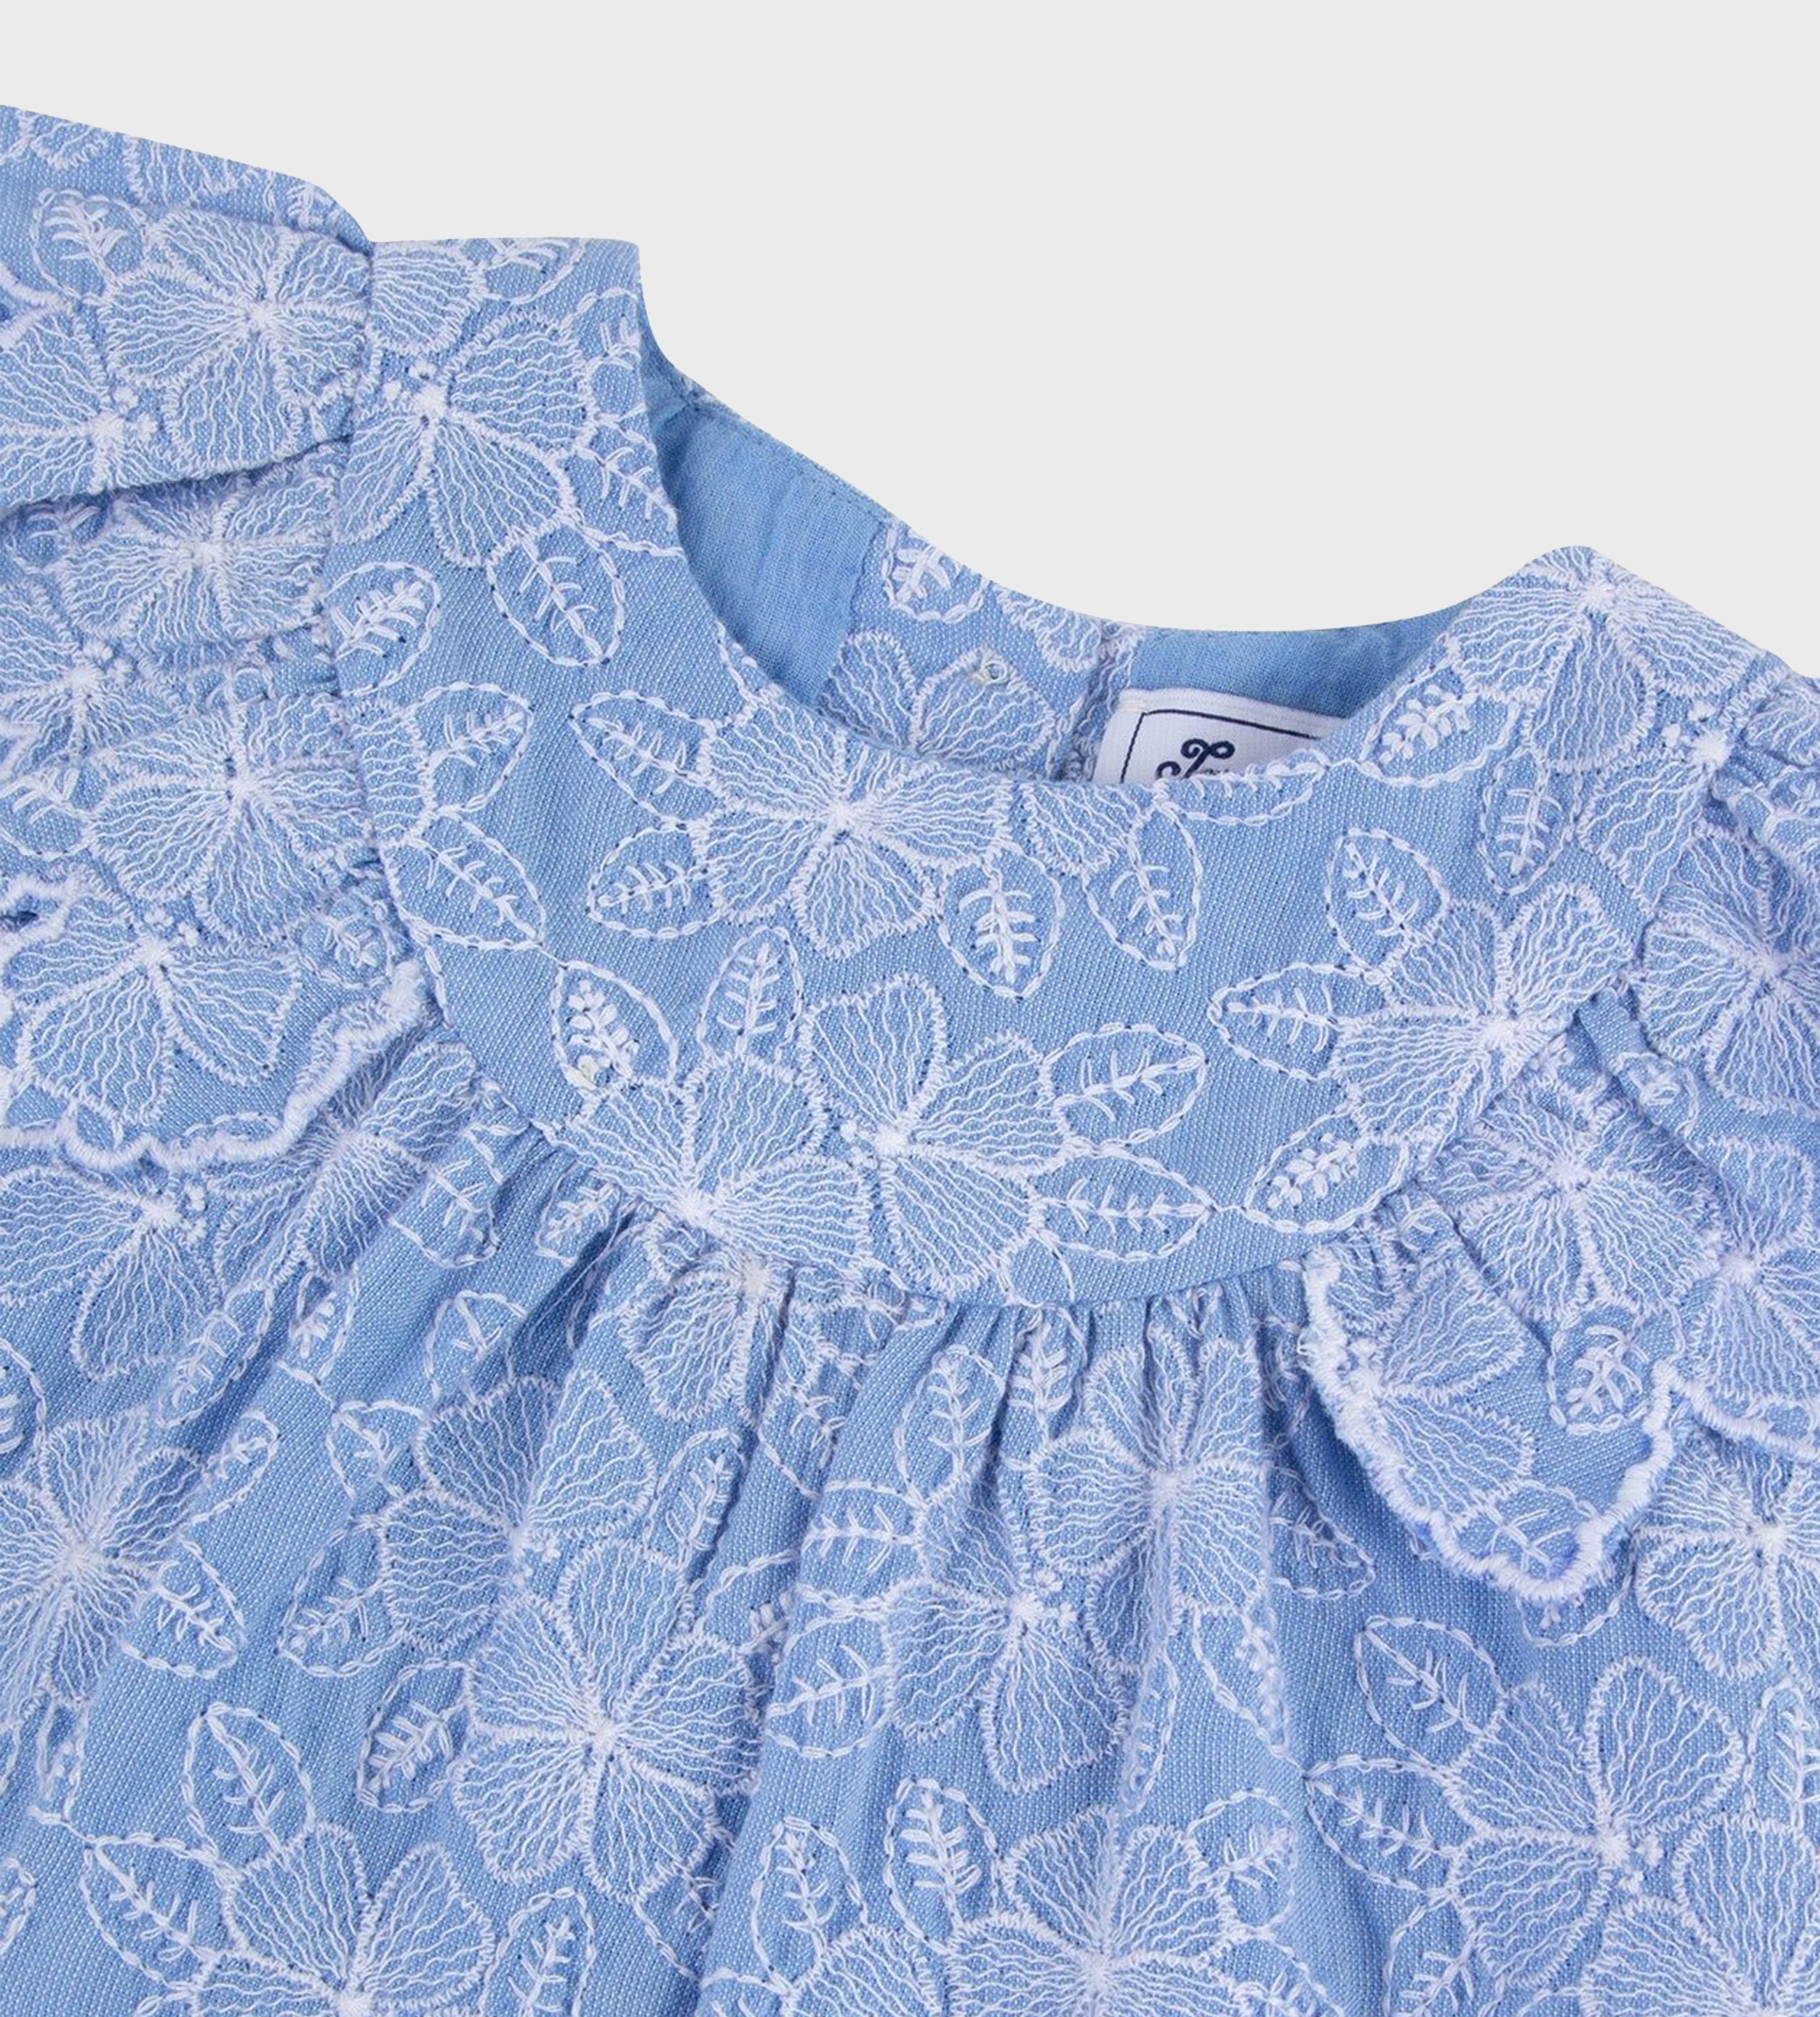 Embroidered Ruffle Dress Blue